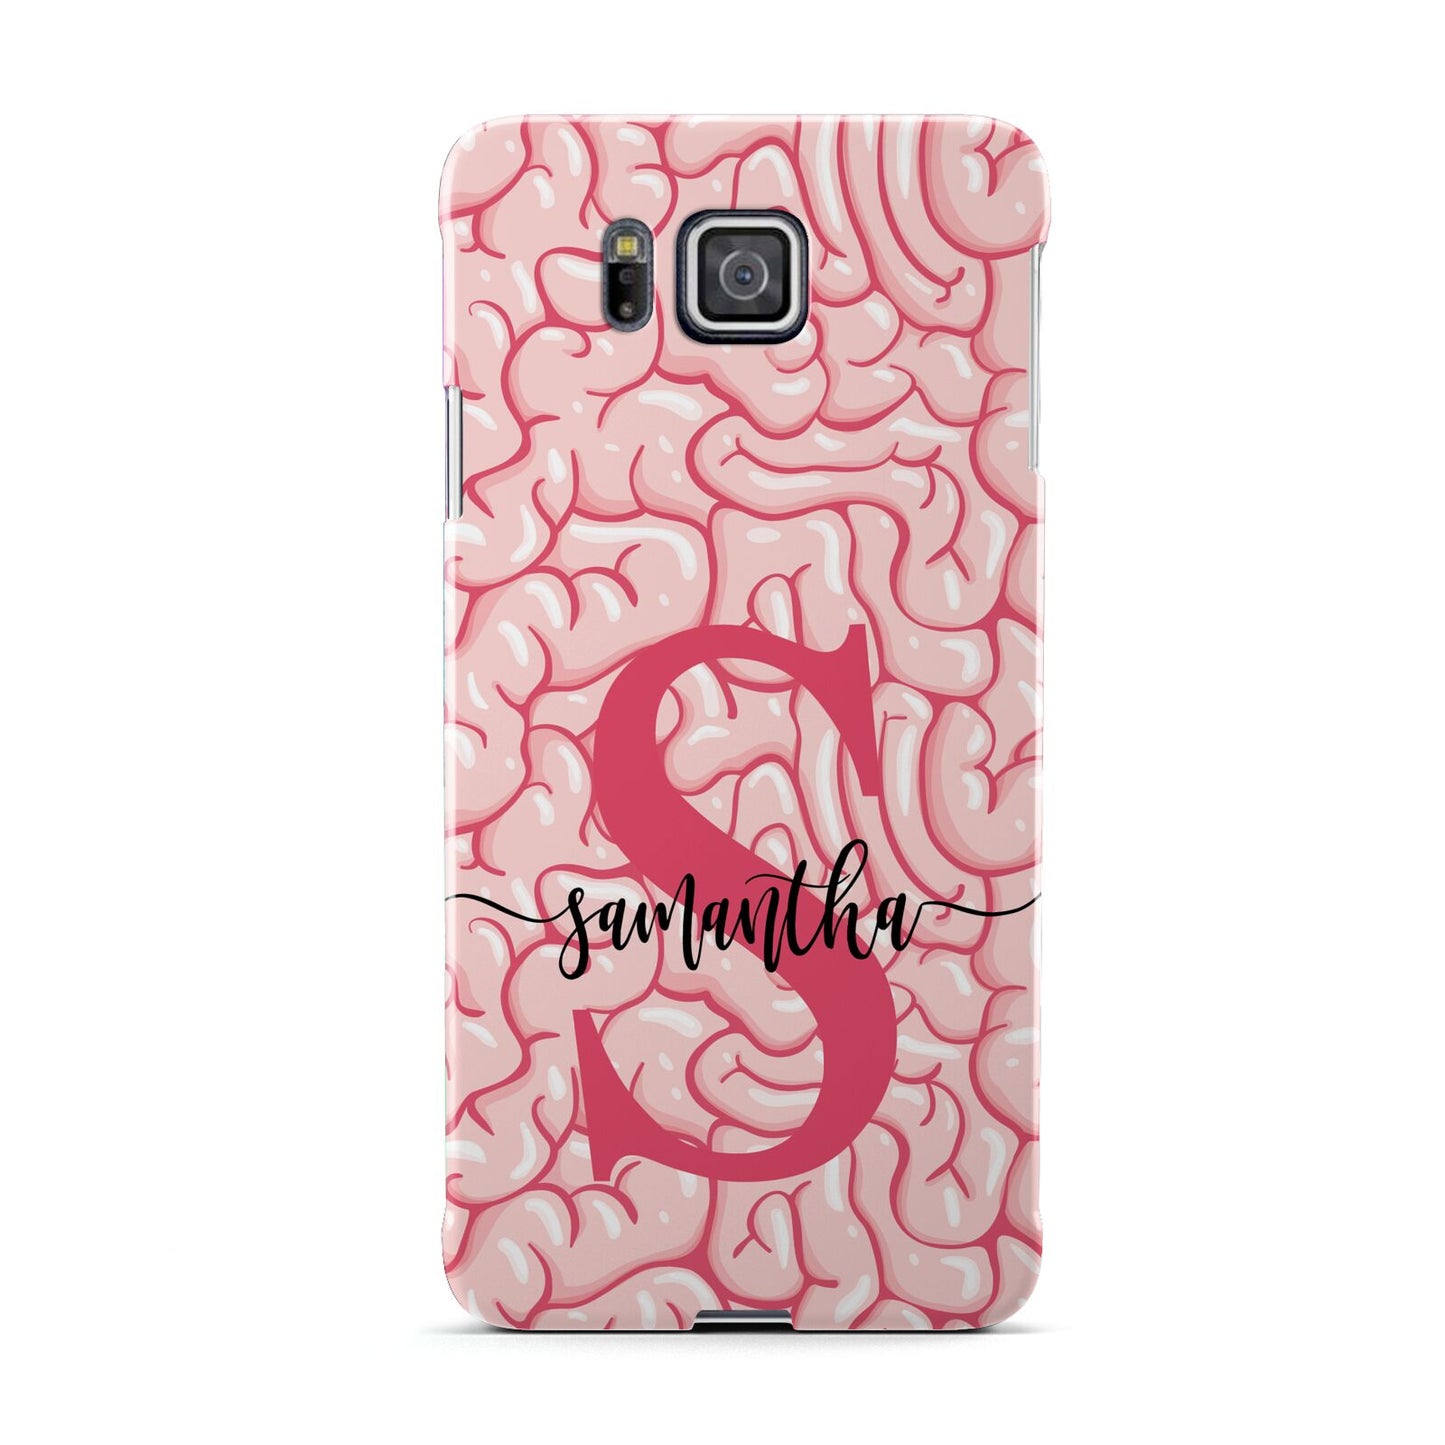 Brain Background with Monogram and Text Samsung Galaxy Alpha Case